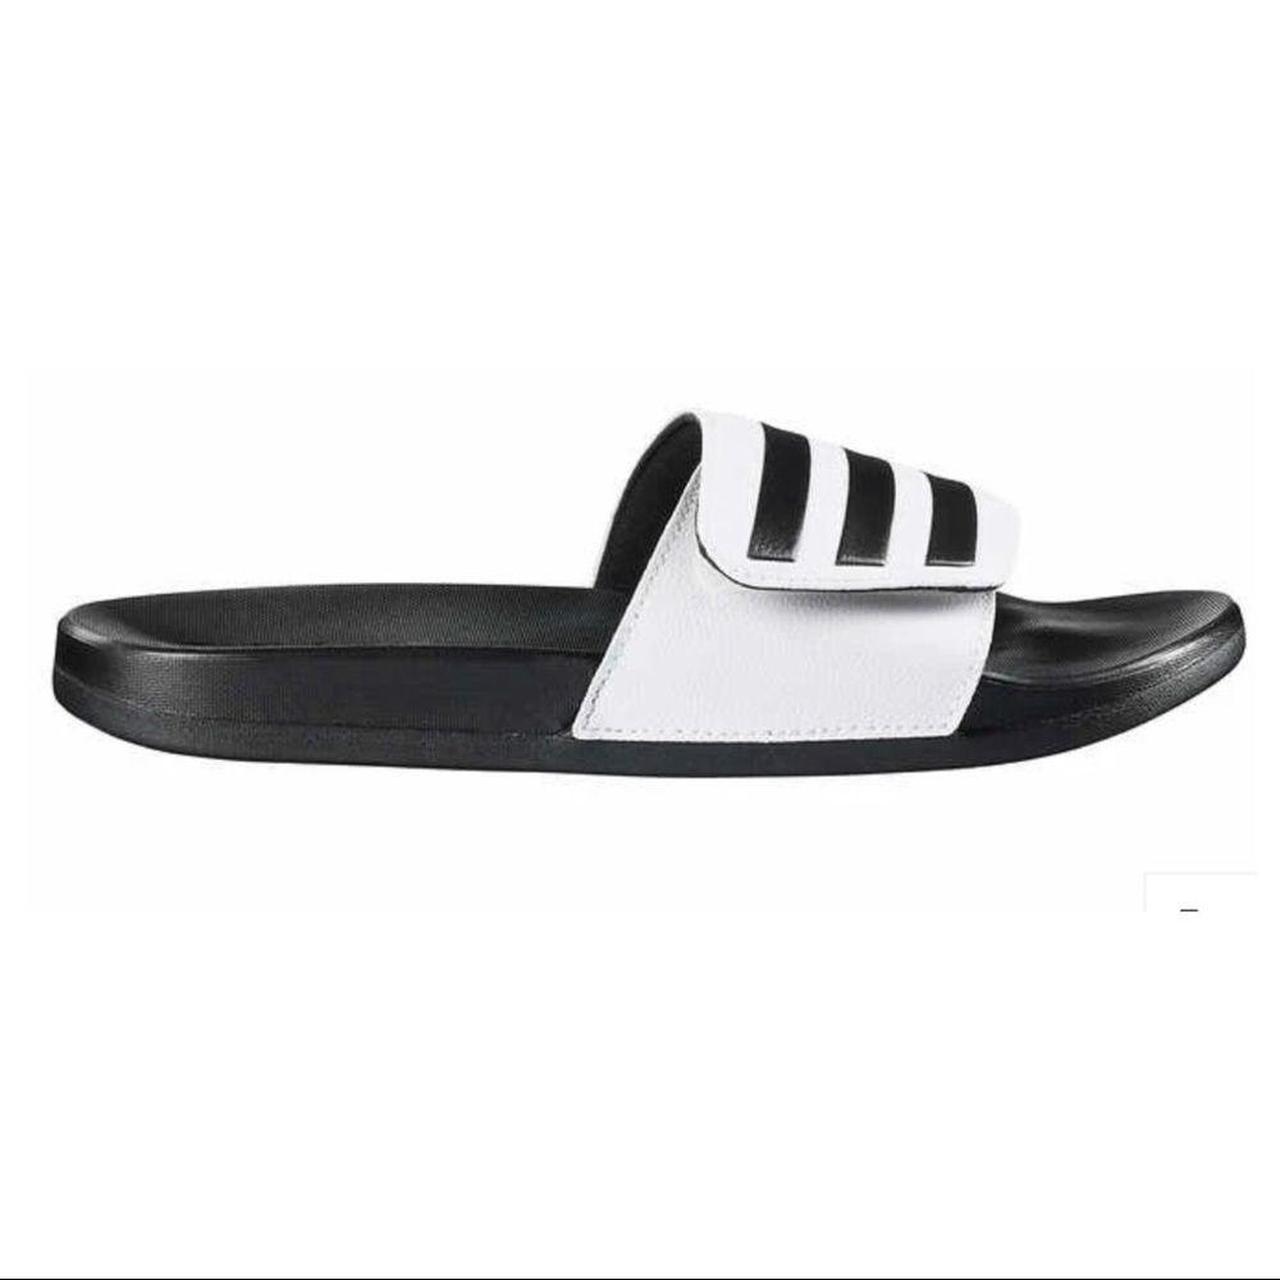 Product Image 3 - Features:                
* Brand Name: Adidas®
*